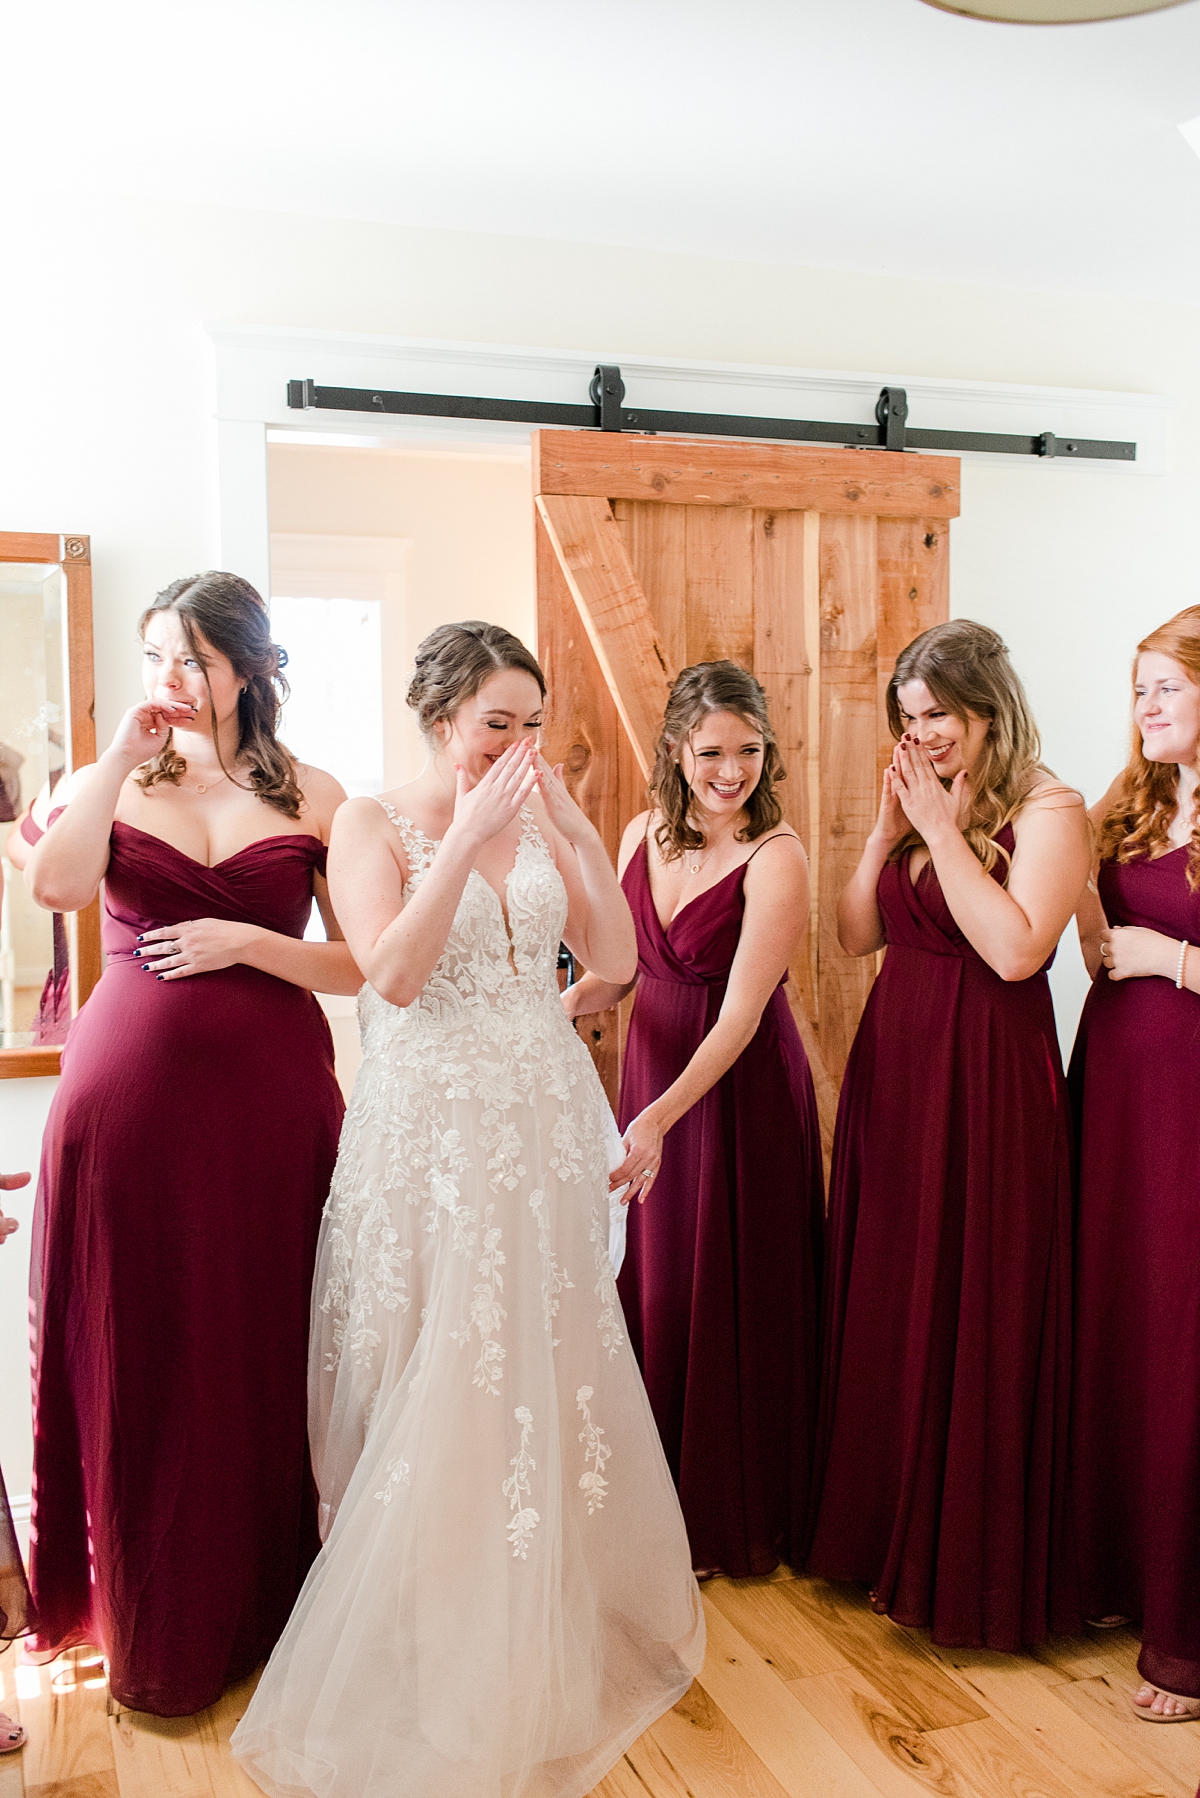 Bridesmaids Reacting to Bride Getting in the Dress at Burlington Fall Wedding. Richmond Wedding Photographer Kailey Brianne Photography. 